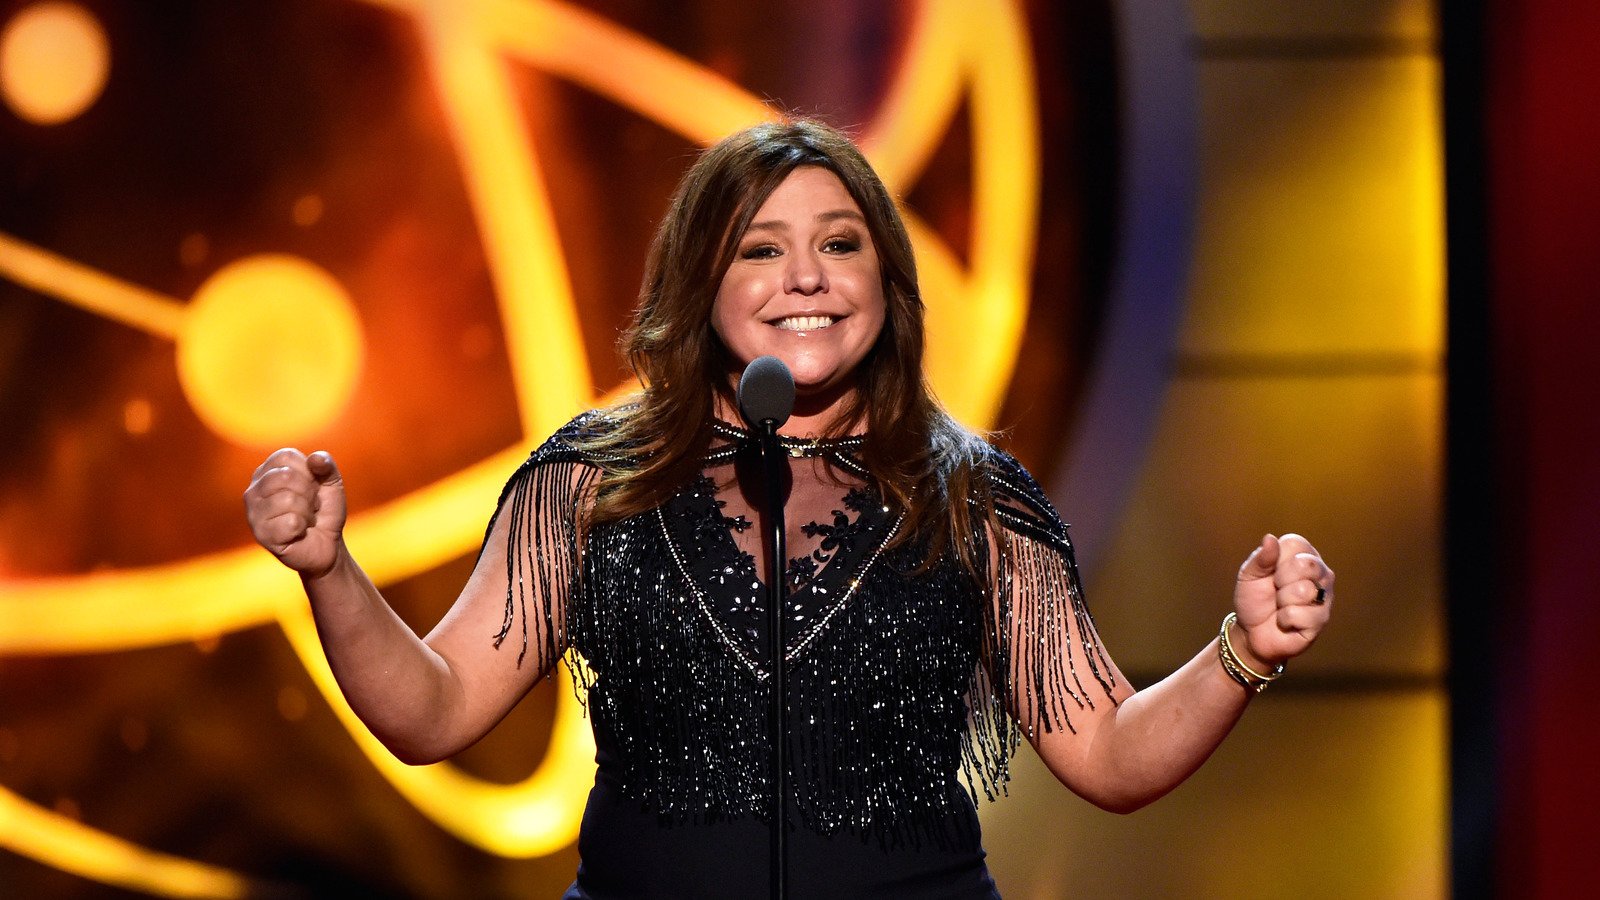 Rachael Ray's Transformation Is Causing Quite A Stir